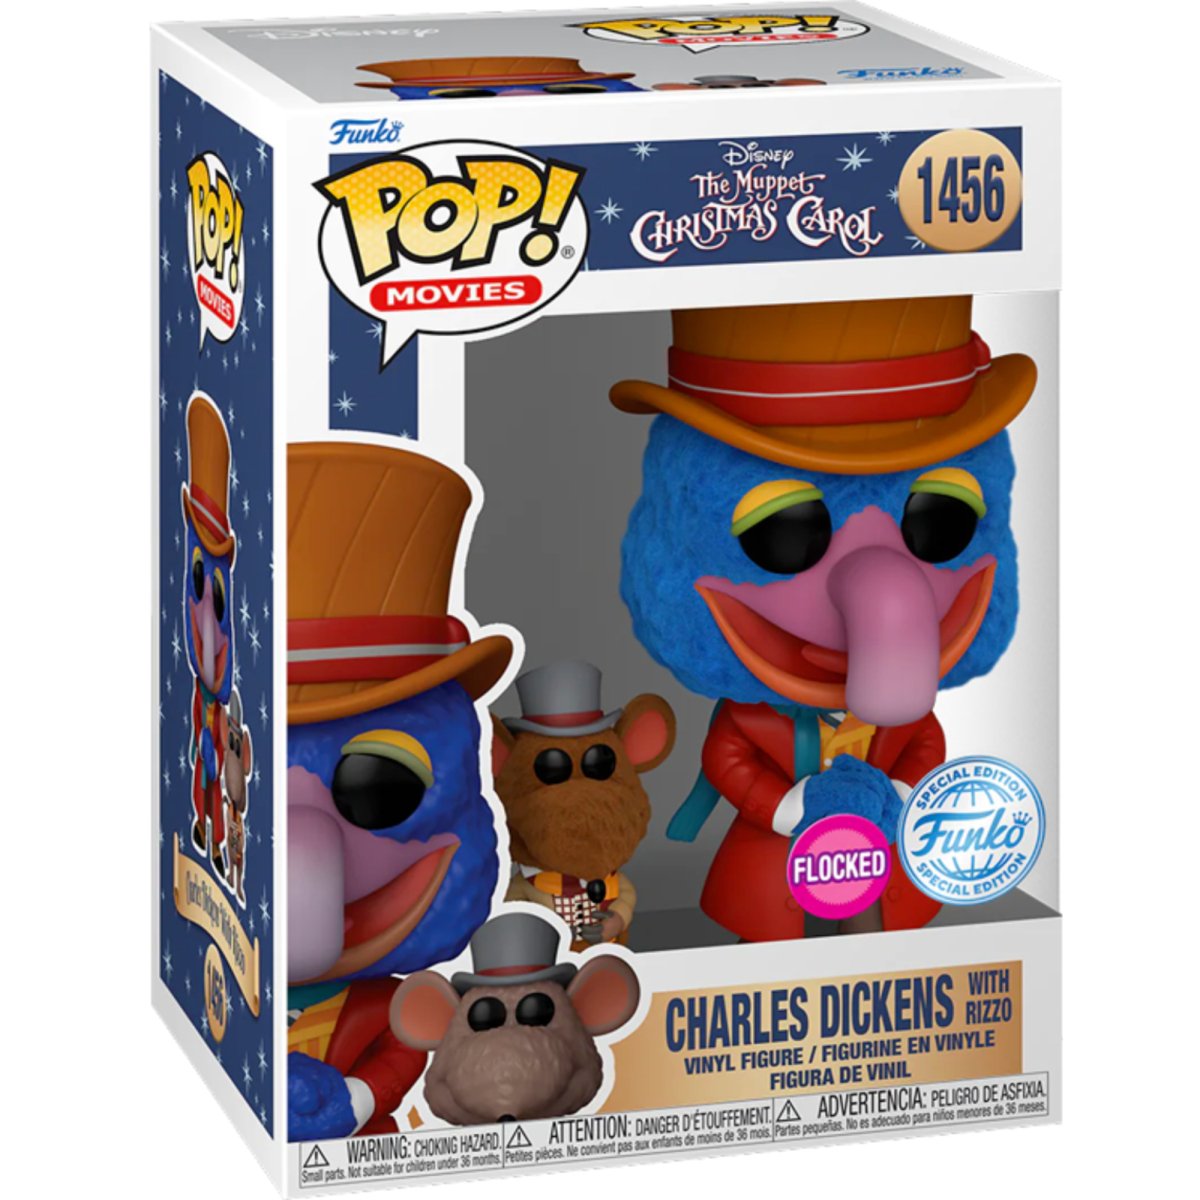 The Muppet Christmas Carol - Charles Dickens with Rizzo (Flocked Special Edition) #1456 - Funko Pop! Vinyl Disney - Persona Toys